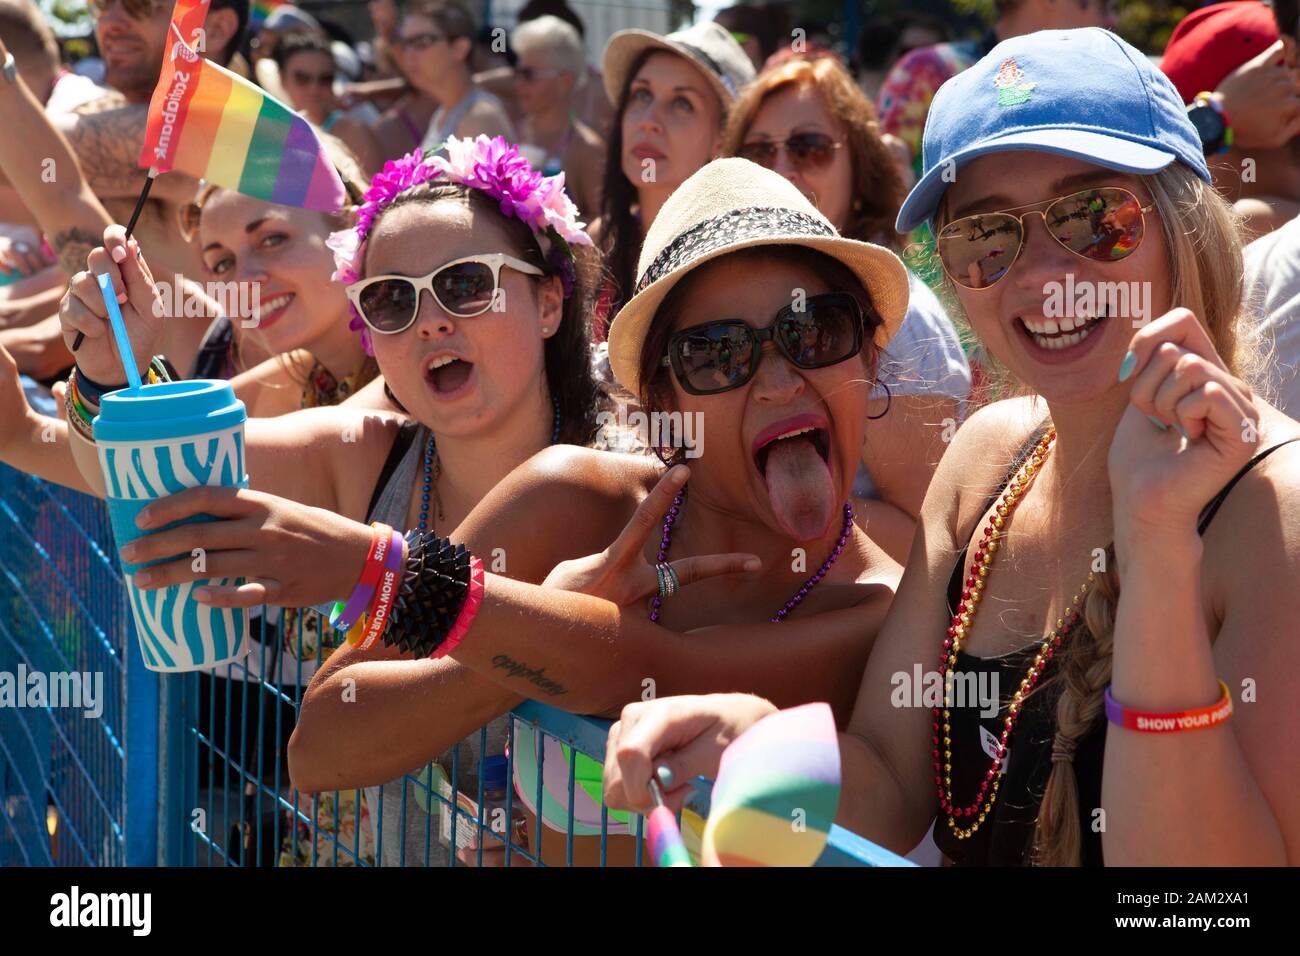 Pride parade participants making faces and gestures at barriers of parade, Vancouver Pride Festival 2014, Vancouver, Canada Stock Photo